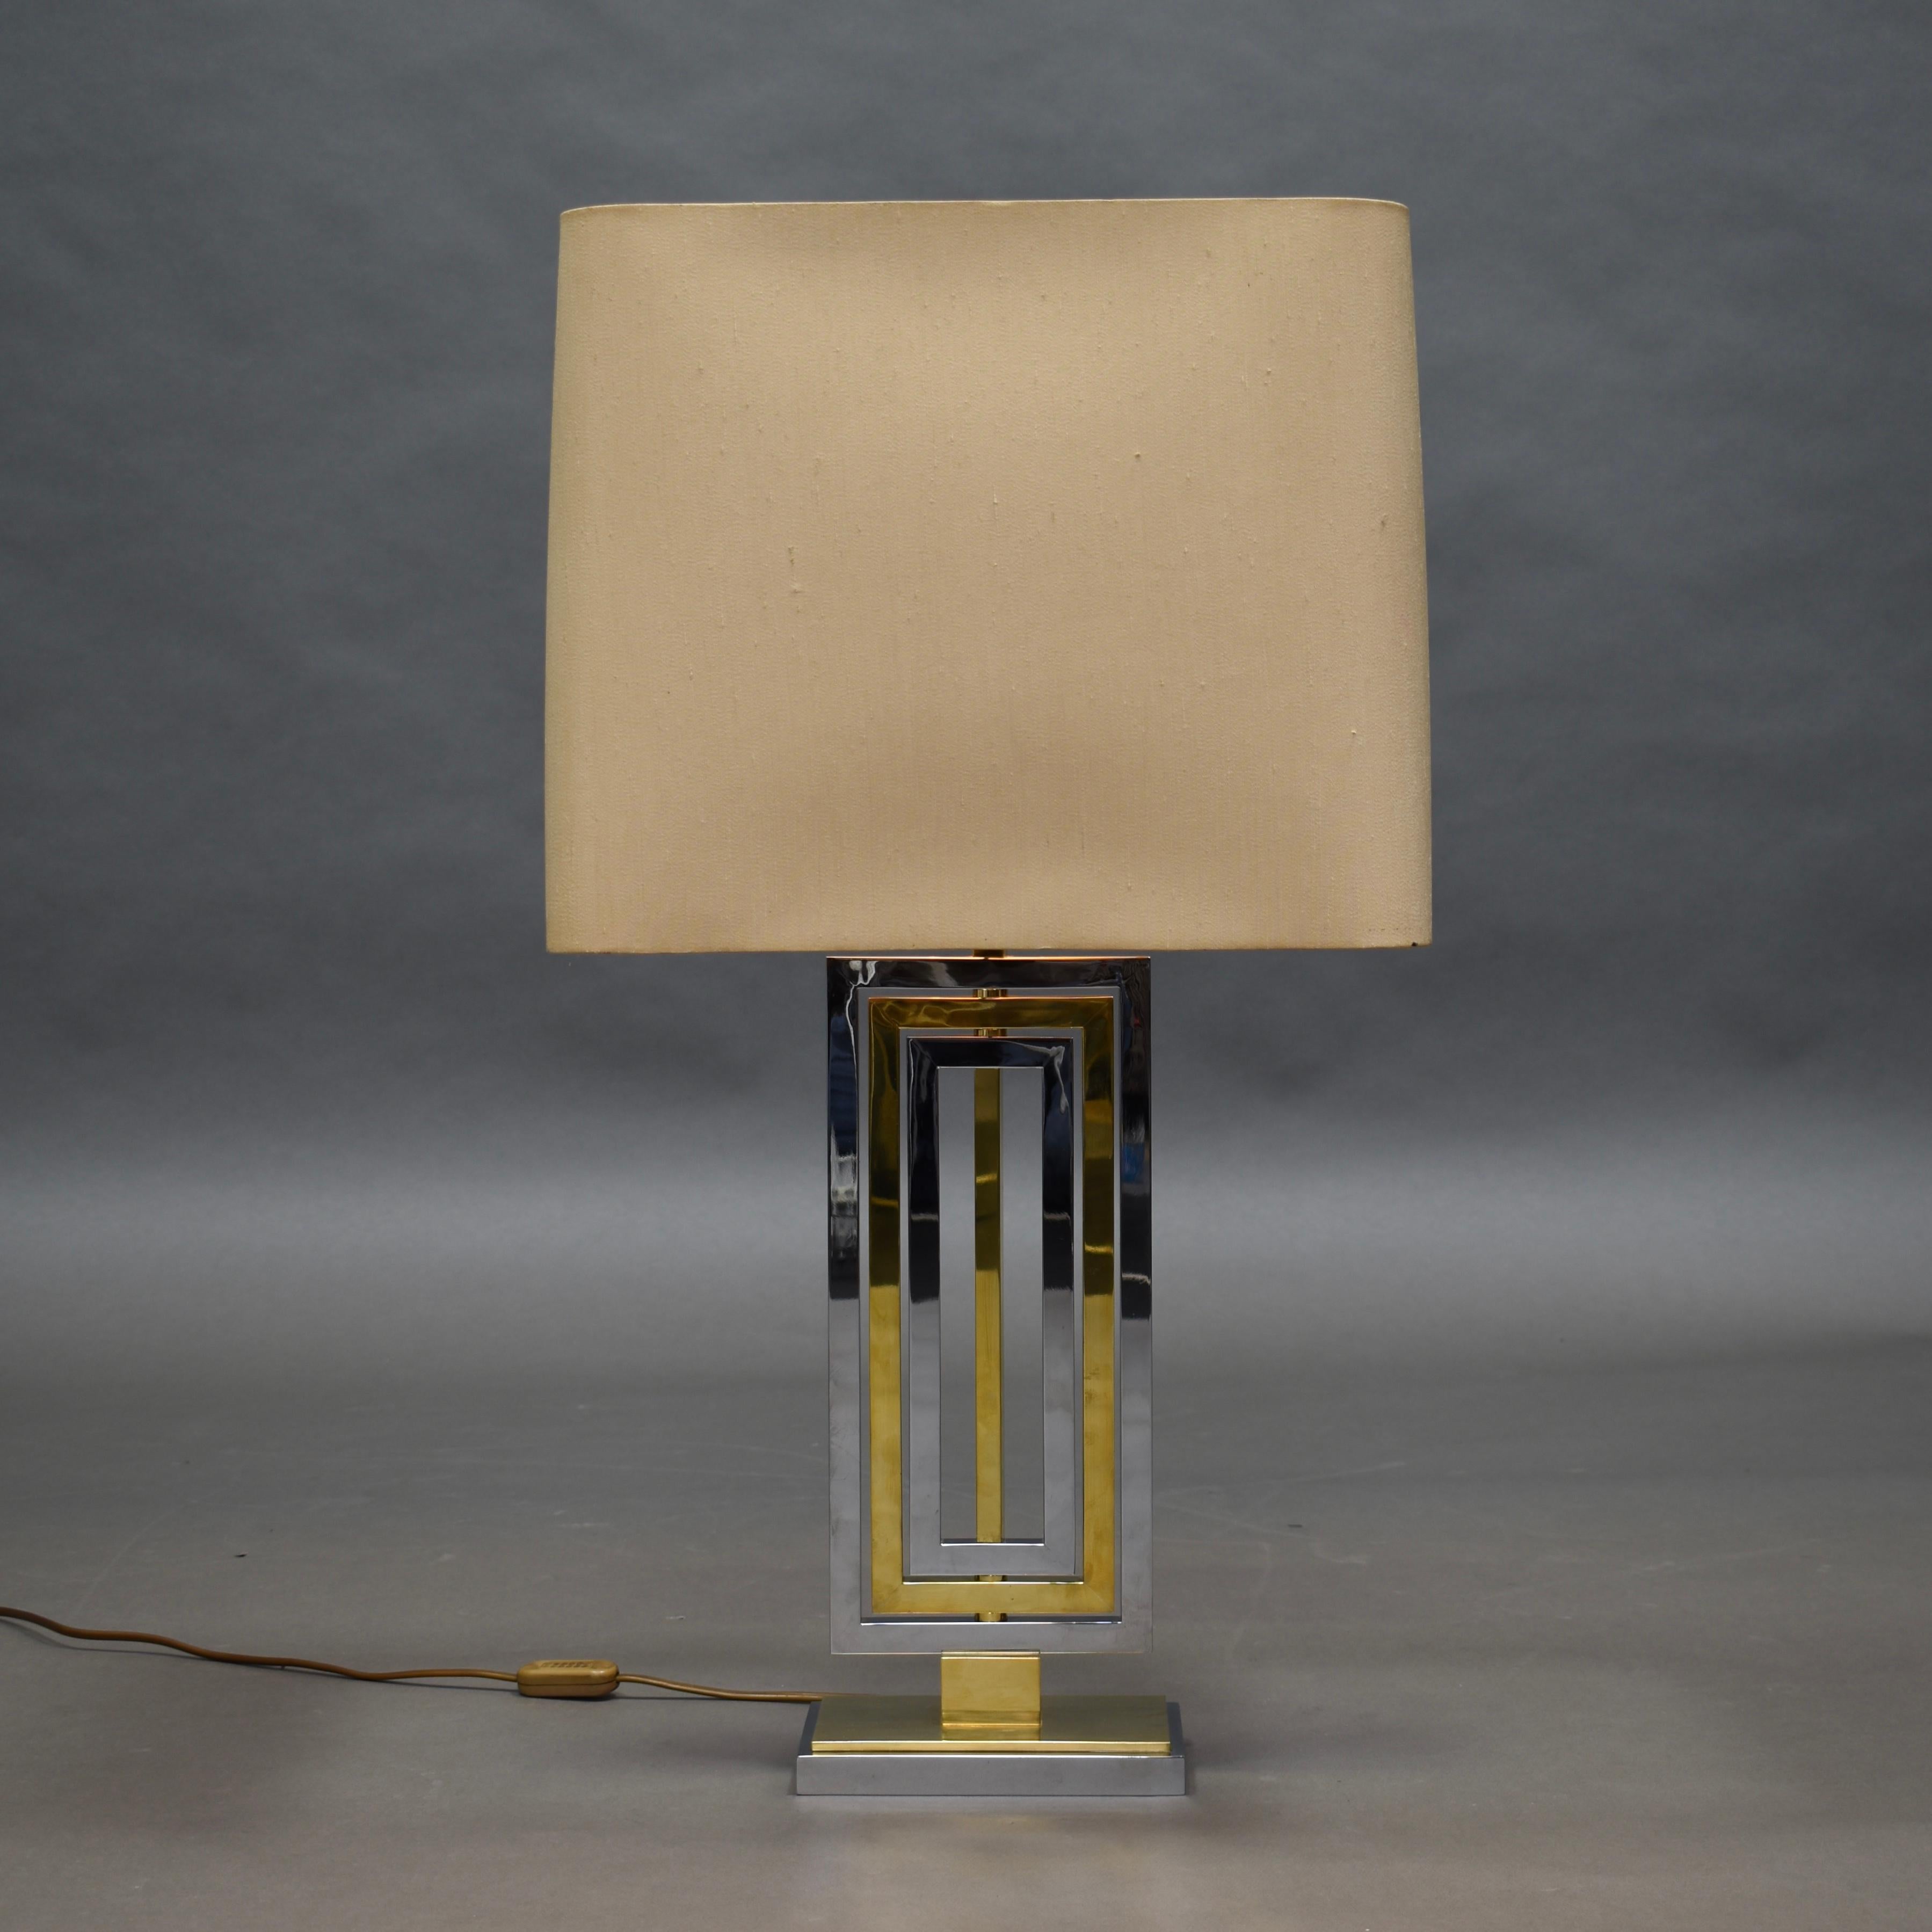 Brass and chrome table lamp by Willy Rizzo, Italy, circa 1970.

Designer: Willy Rizzo

Country: Italy

Model: Table lamp

Material:

Design period: circa 1970

Size in cm: W 19 x D 12 x H 51 centimeter

Condition: Very good / the shade